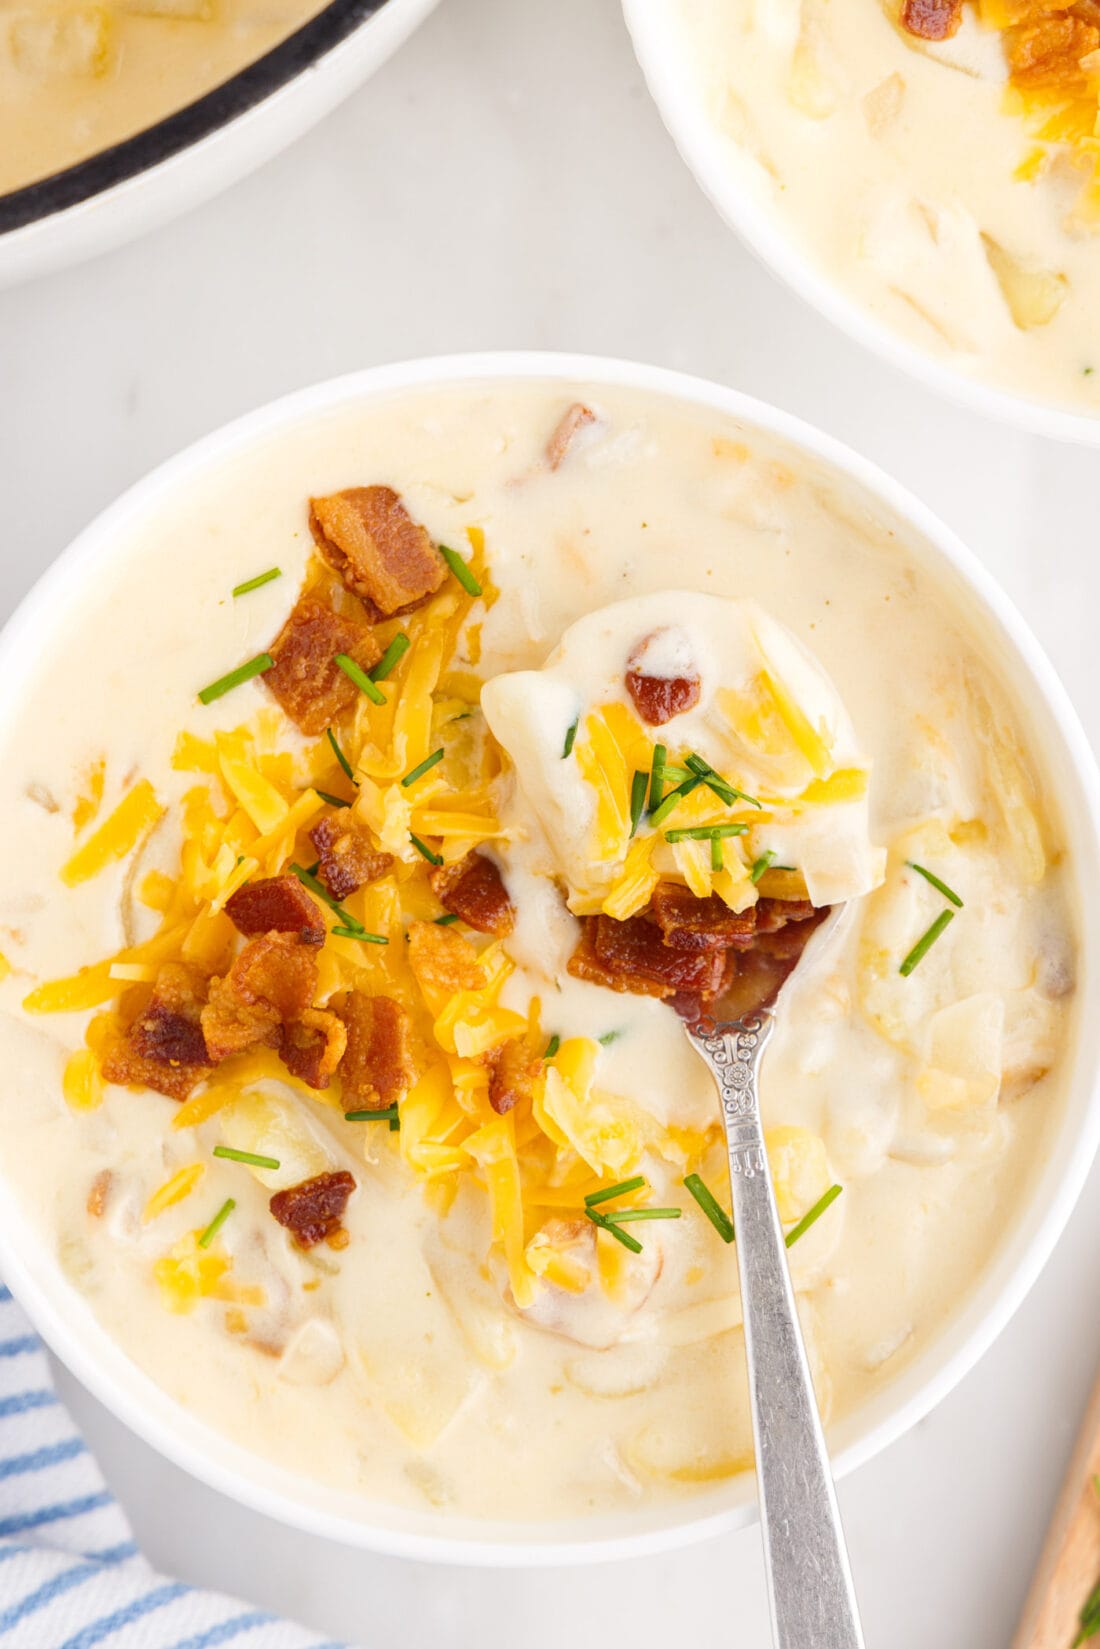 Spoonful of Baked Potato Soup over a bowl of Baked Potato Soup